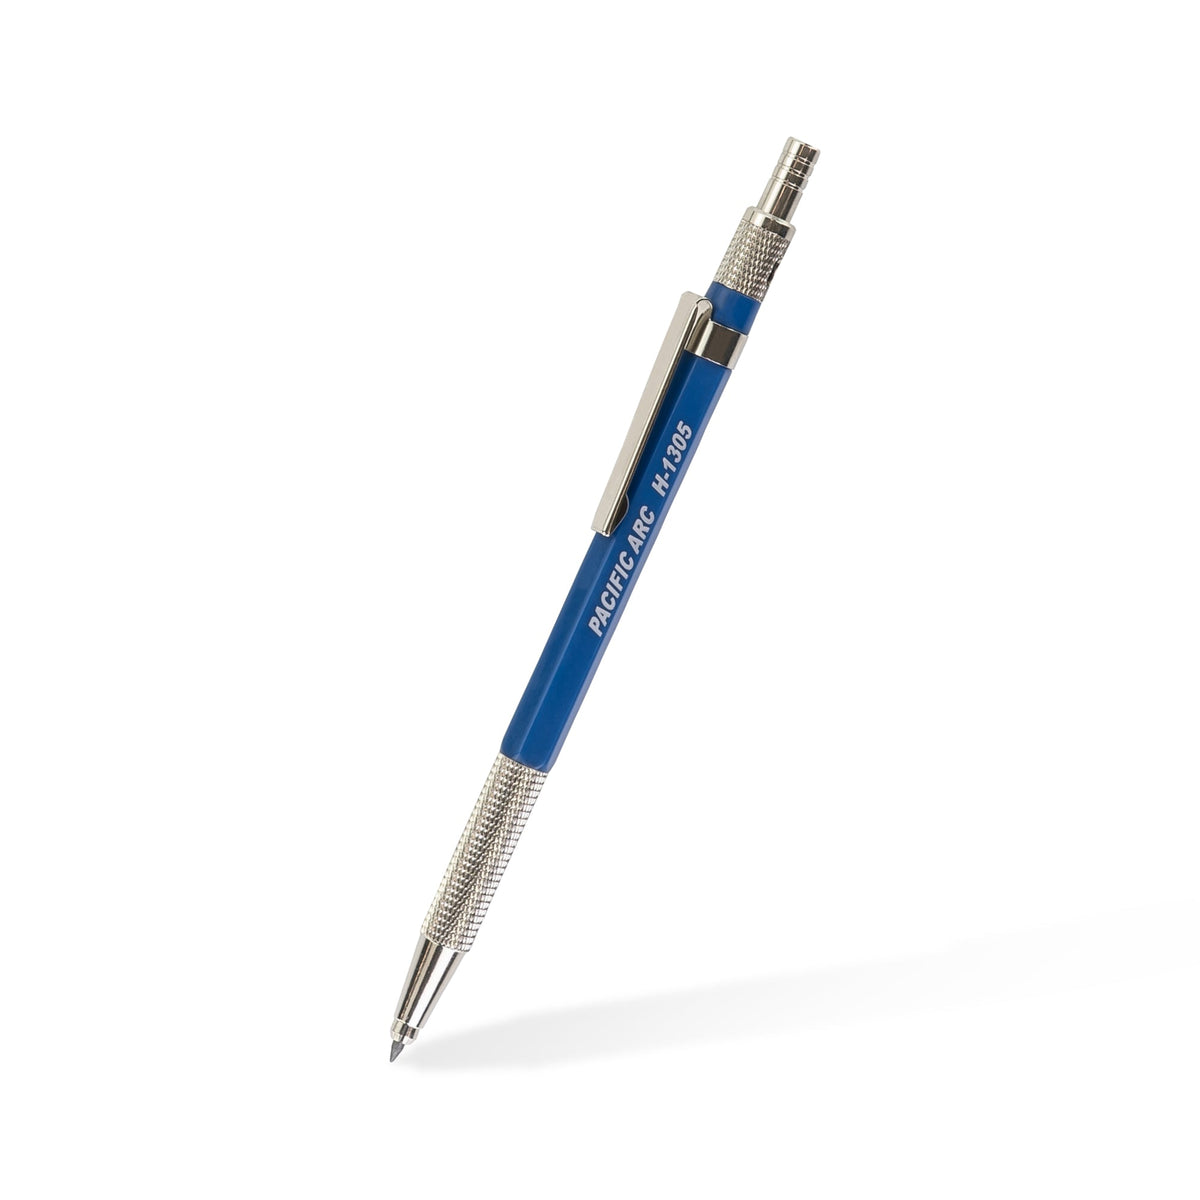 Pacific Arc, 2mm Lead Holder and Lead Sharpener, Drafting Pencil for Artist Drawing, Drafting, and Sketching